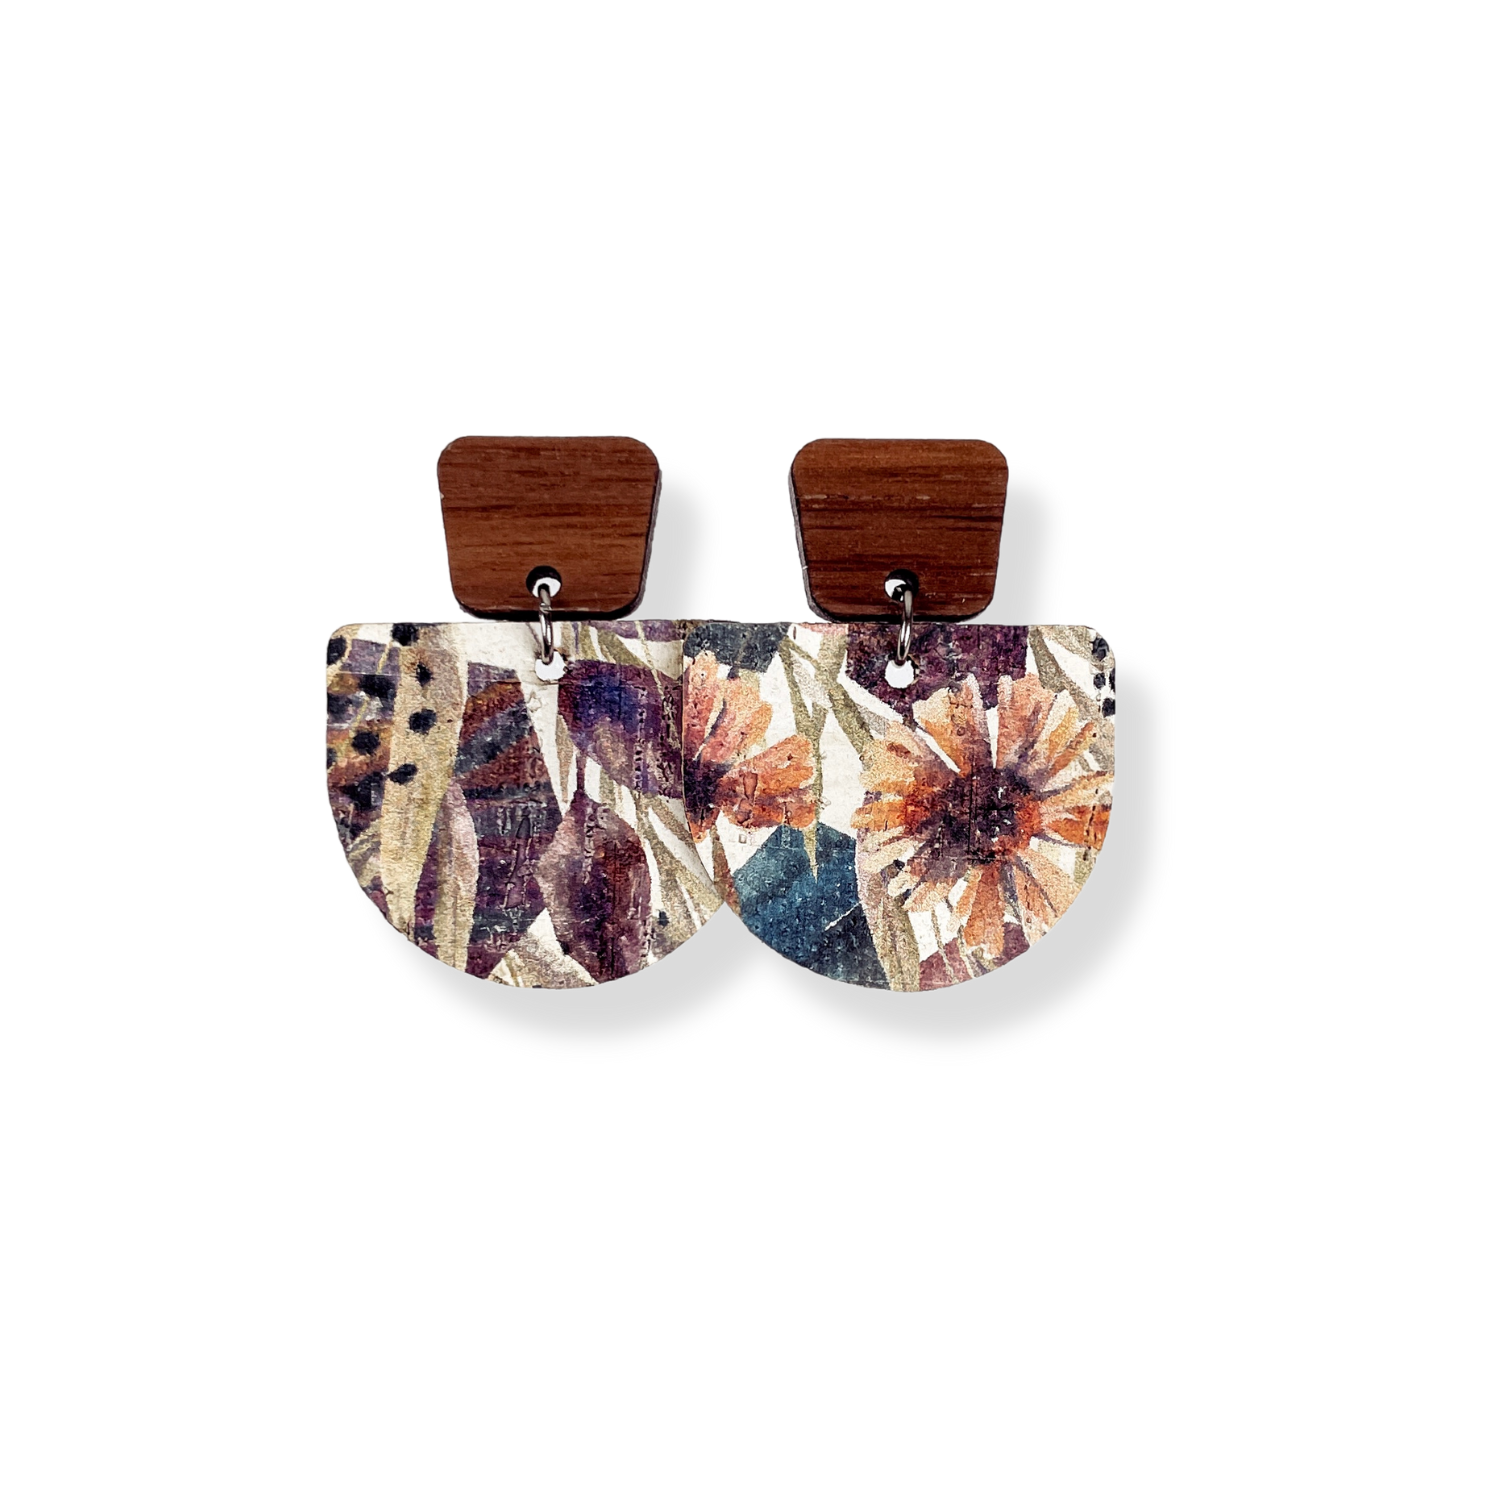 Charlie Walnut Wood and Cork Earrings- Autumn Floral